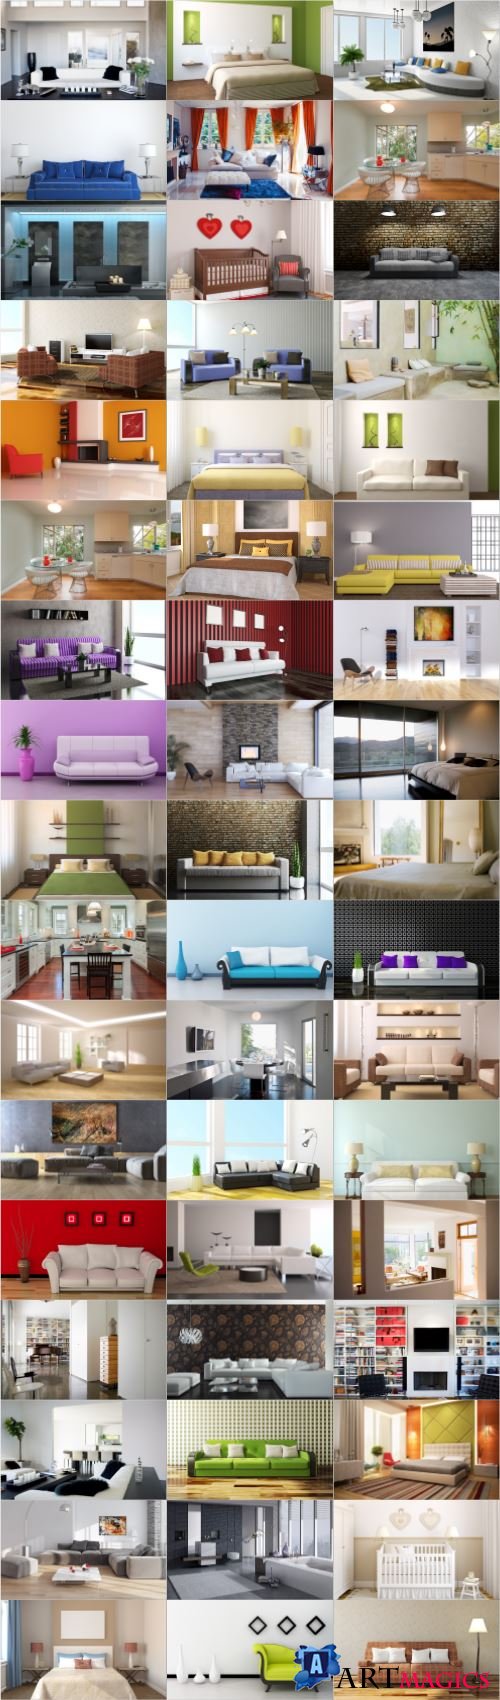 Modern interior large selection of stock photos